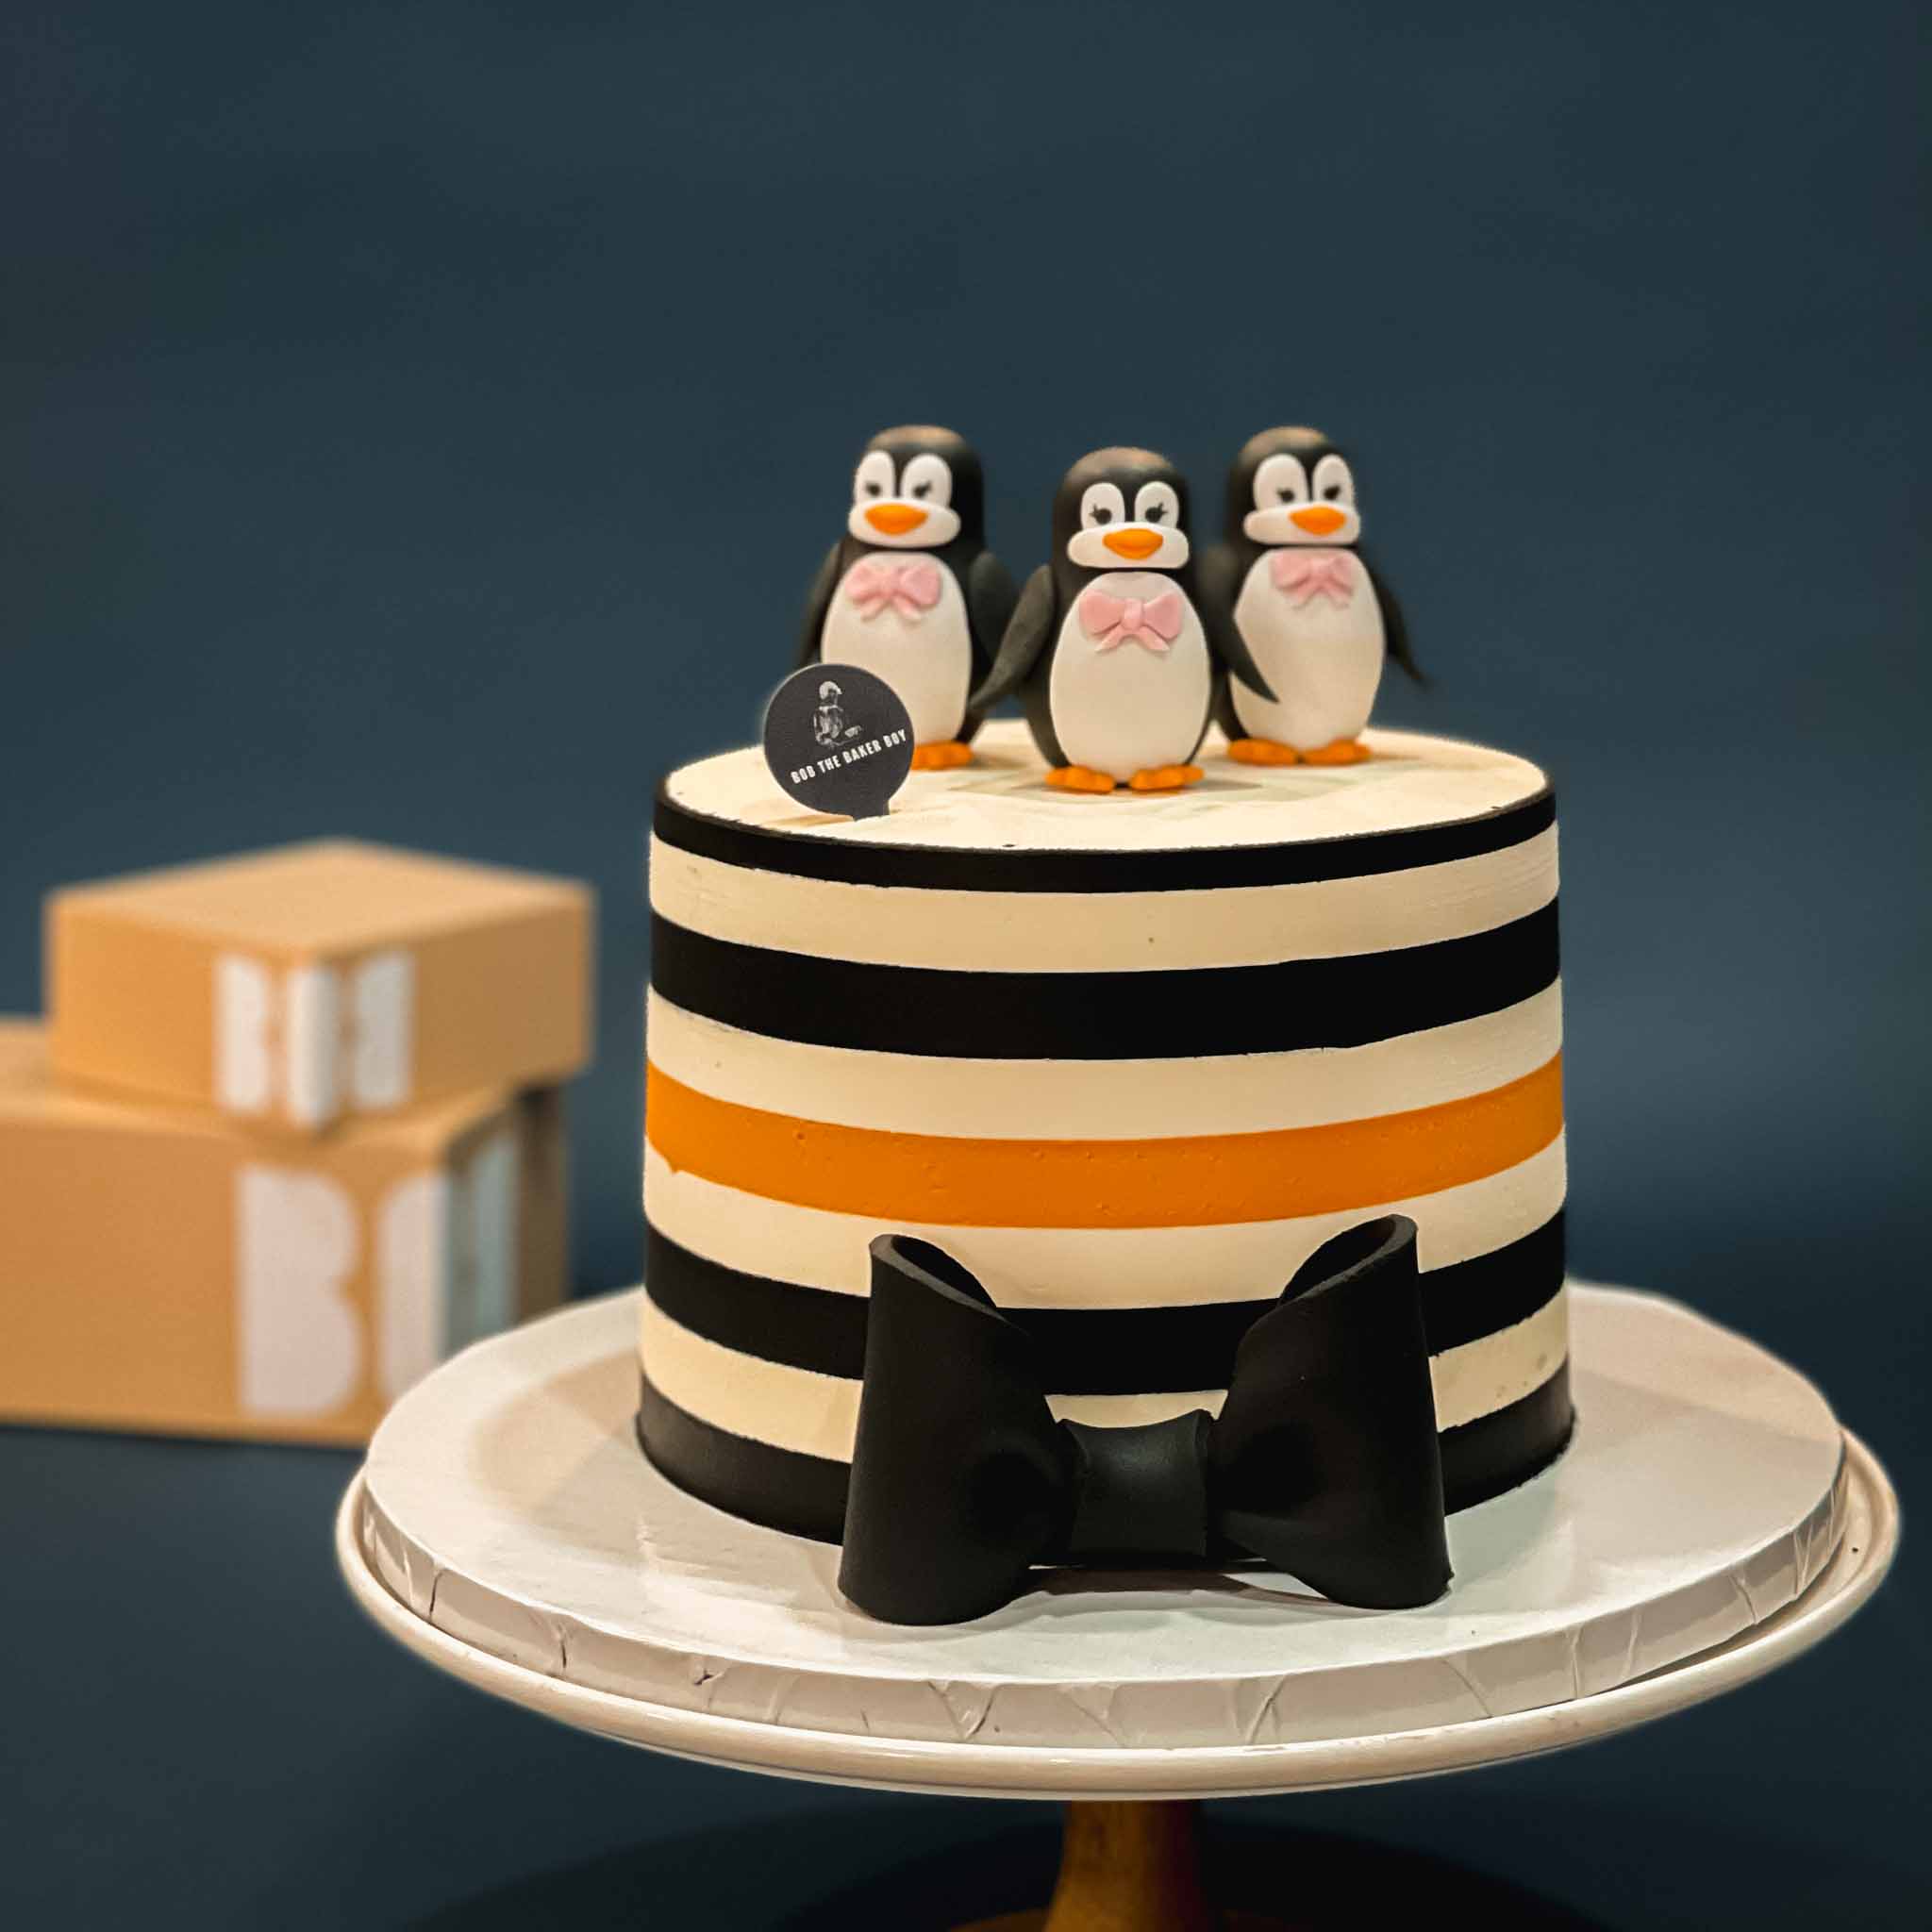 A Beginner’s Guide to Ordering a Customised Birthday Cake